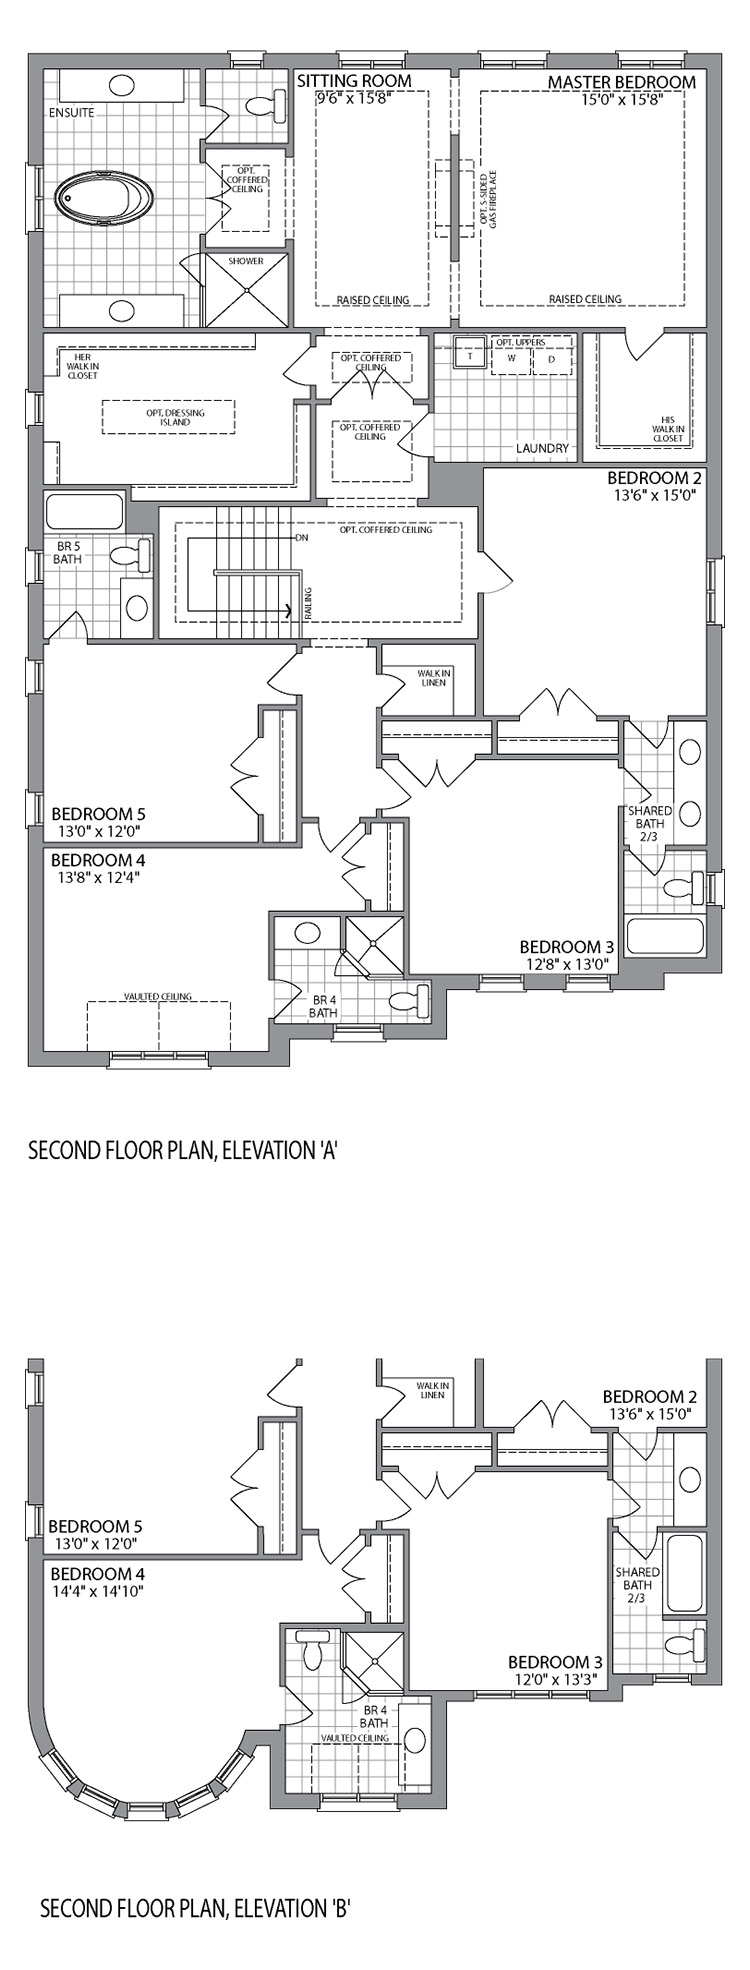 Second Floor Elevation A & B